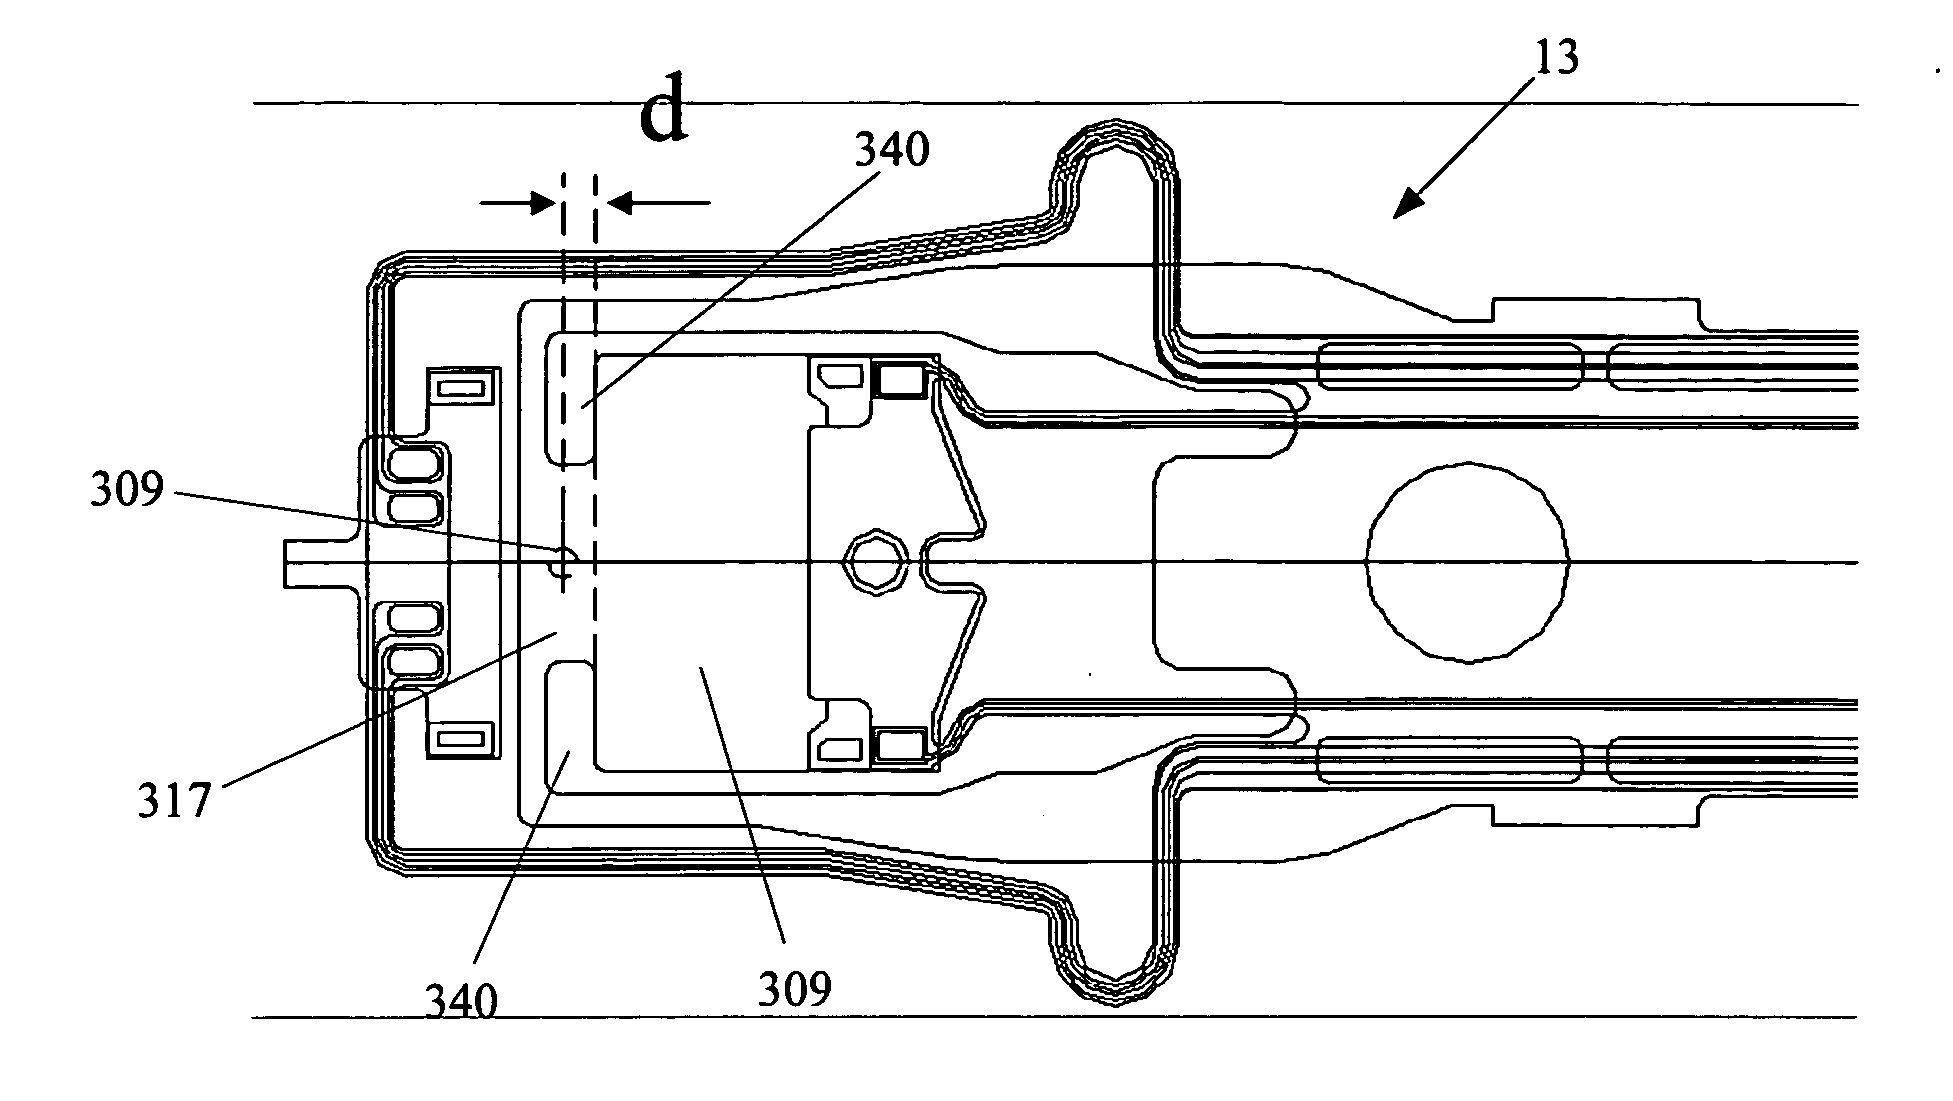 Suspension, head gimbal assembly and disk drive unit with the same